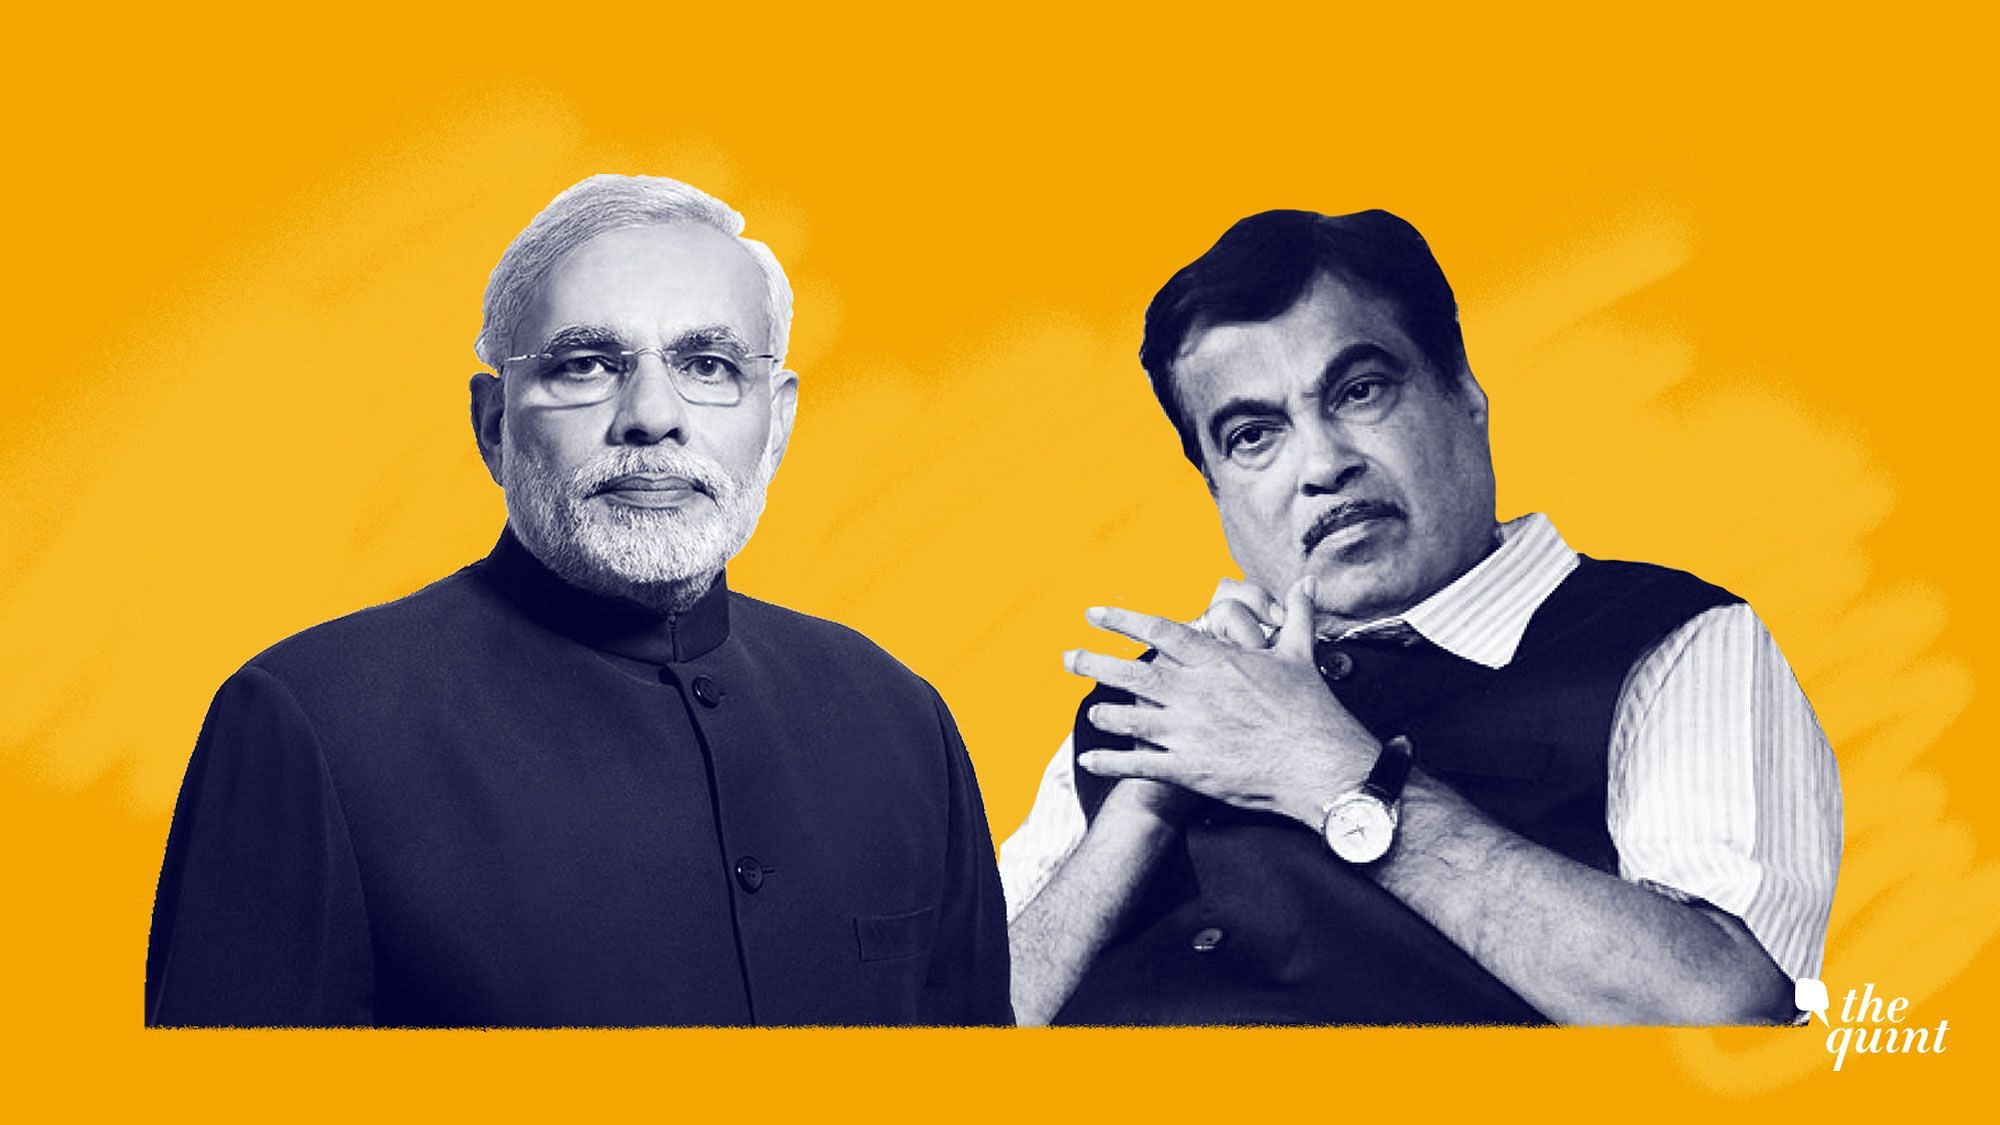 With the general elections around the corner, the shadow power play between Prime Minister Narendra Modi and Union Transport Minister Nitin Gadkari has intensified.